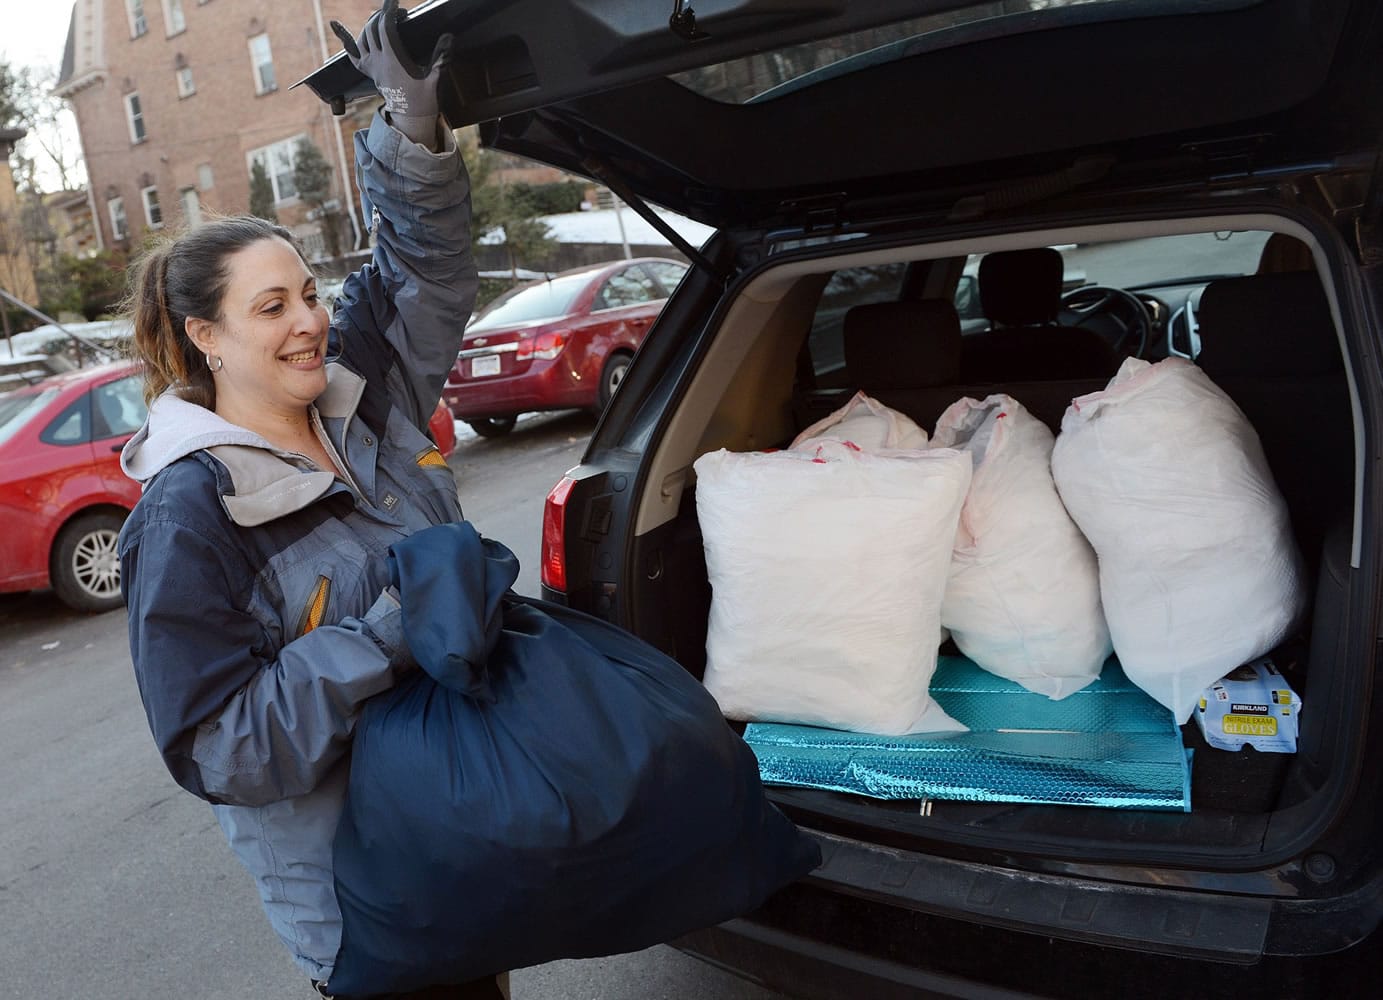 Ilene Scoratow pulls a bag of clean laundry from her vehicle while making a drop-off at Weinberg Terrace on Jan. 15 in Squirrel Hill, Pa.